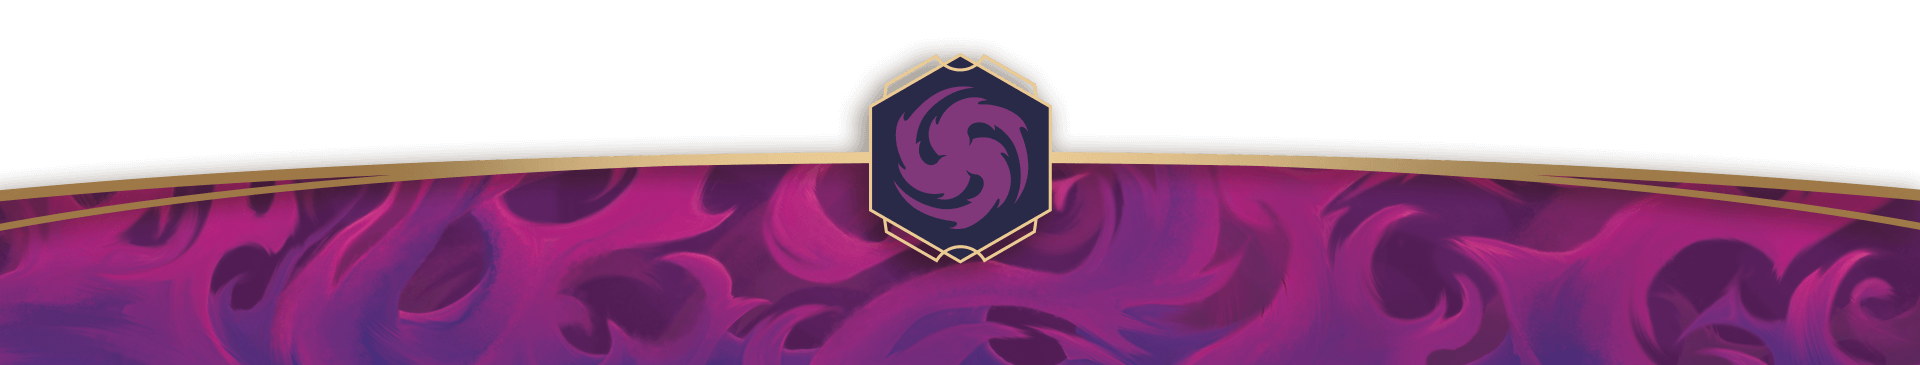 Decorative header image for the Amethyst ink type